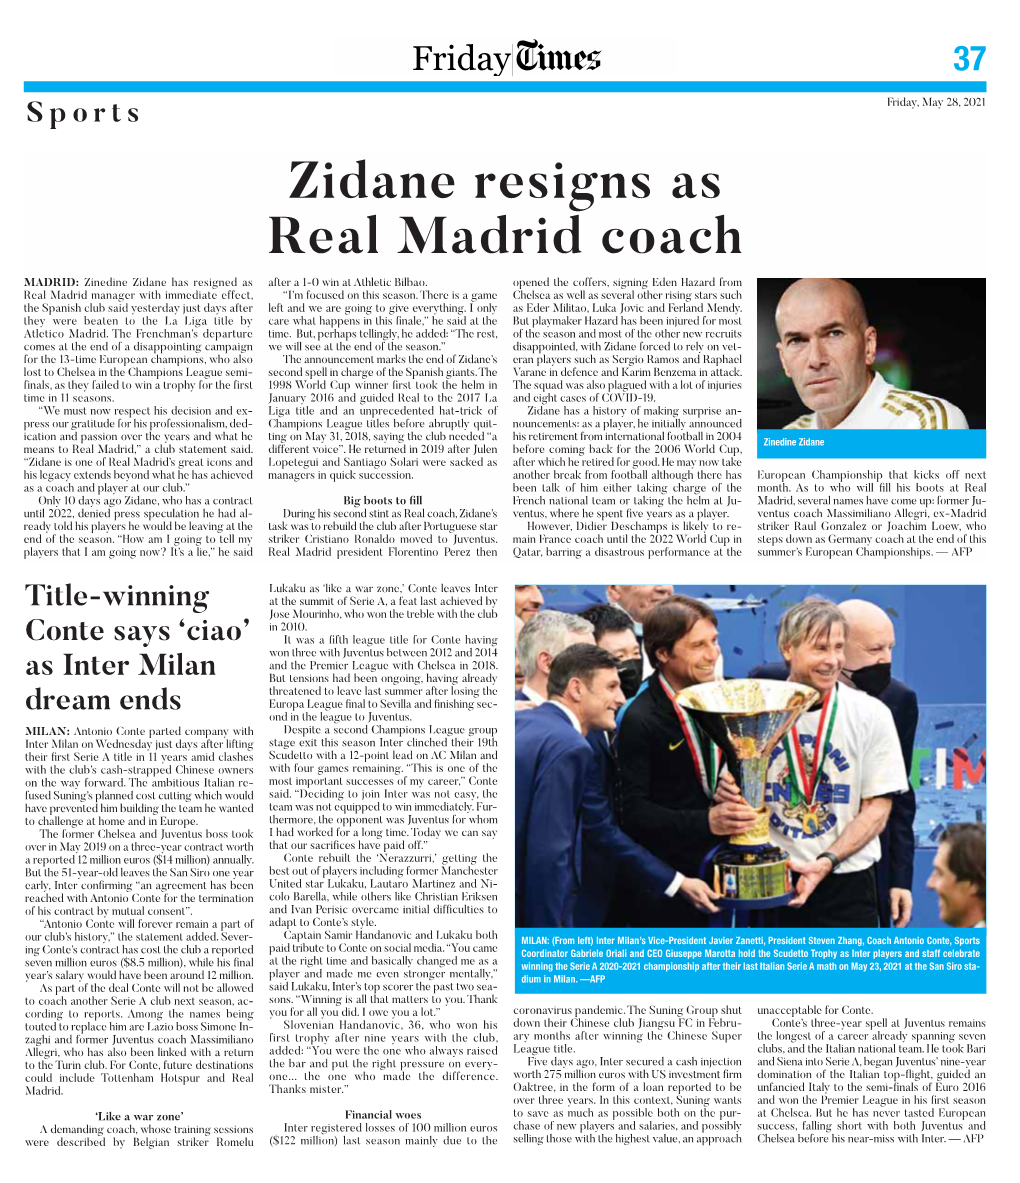 Zidane Resigns As Real Madrid Coach MADRID: Zinedine Zidane Has Resigned As After a 1-0 Win at Athletic Bilbao